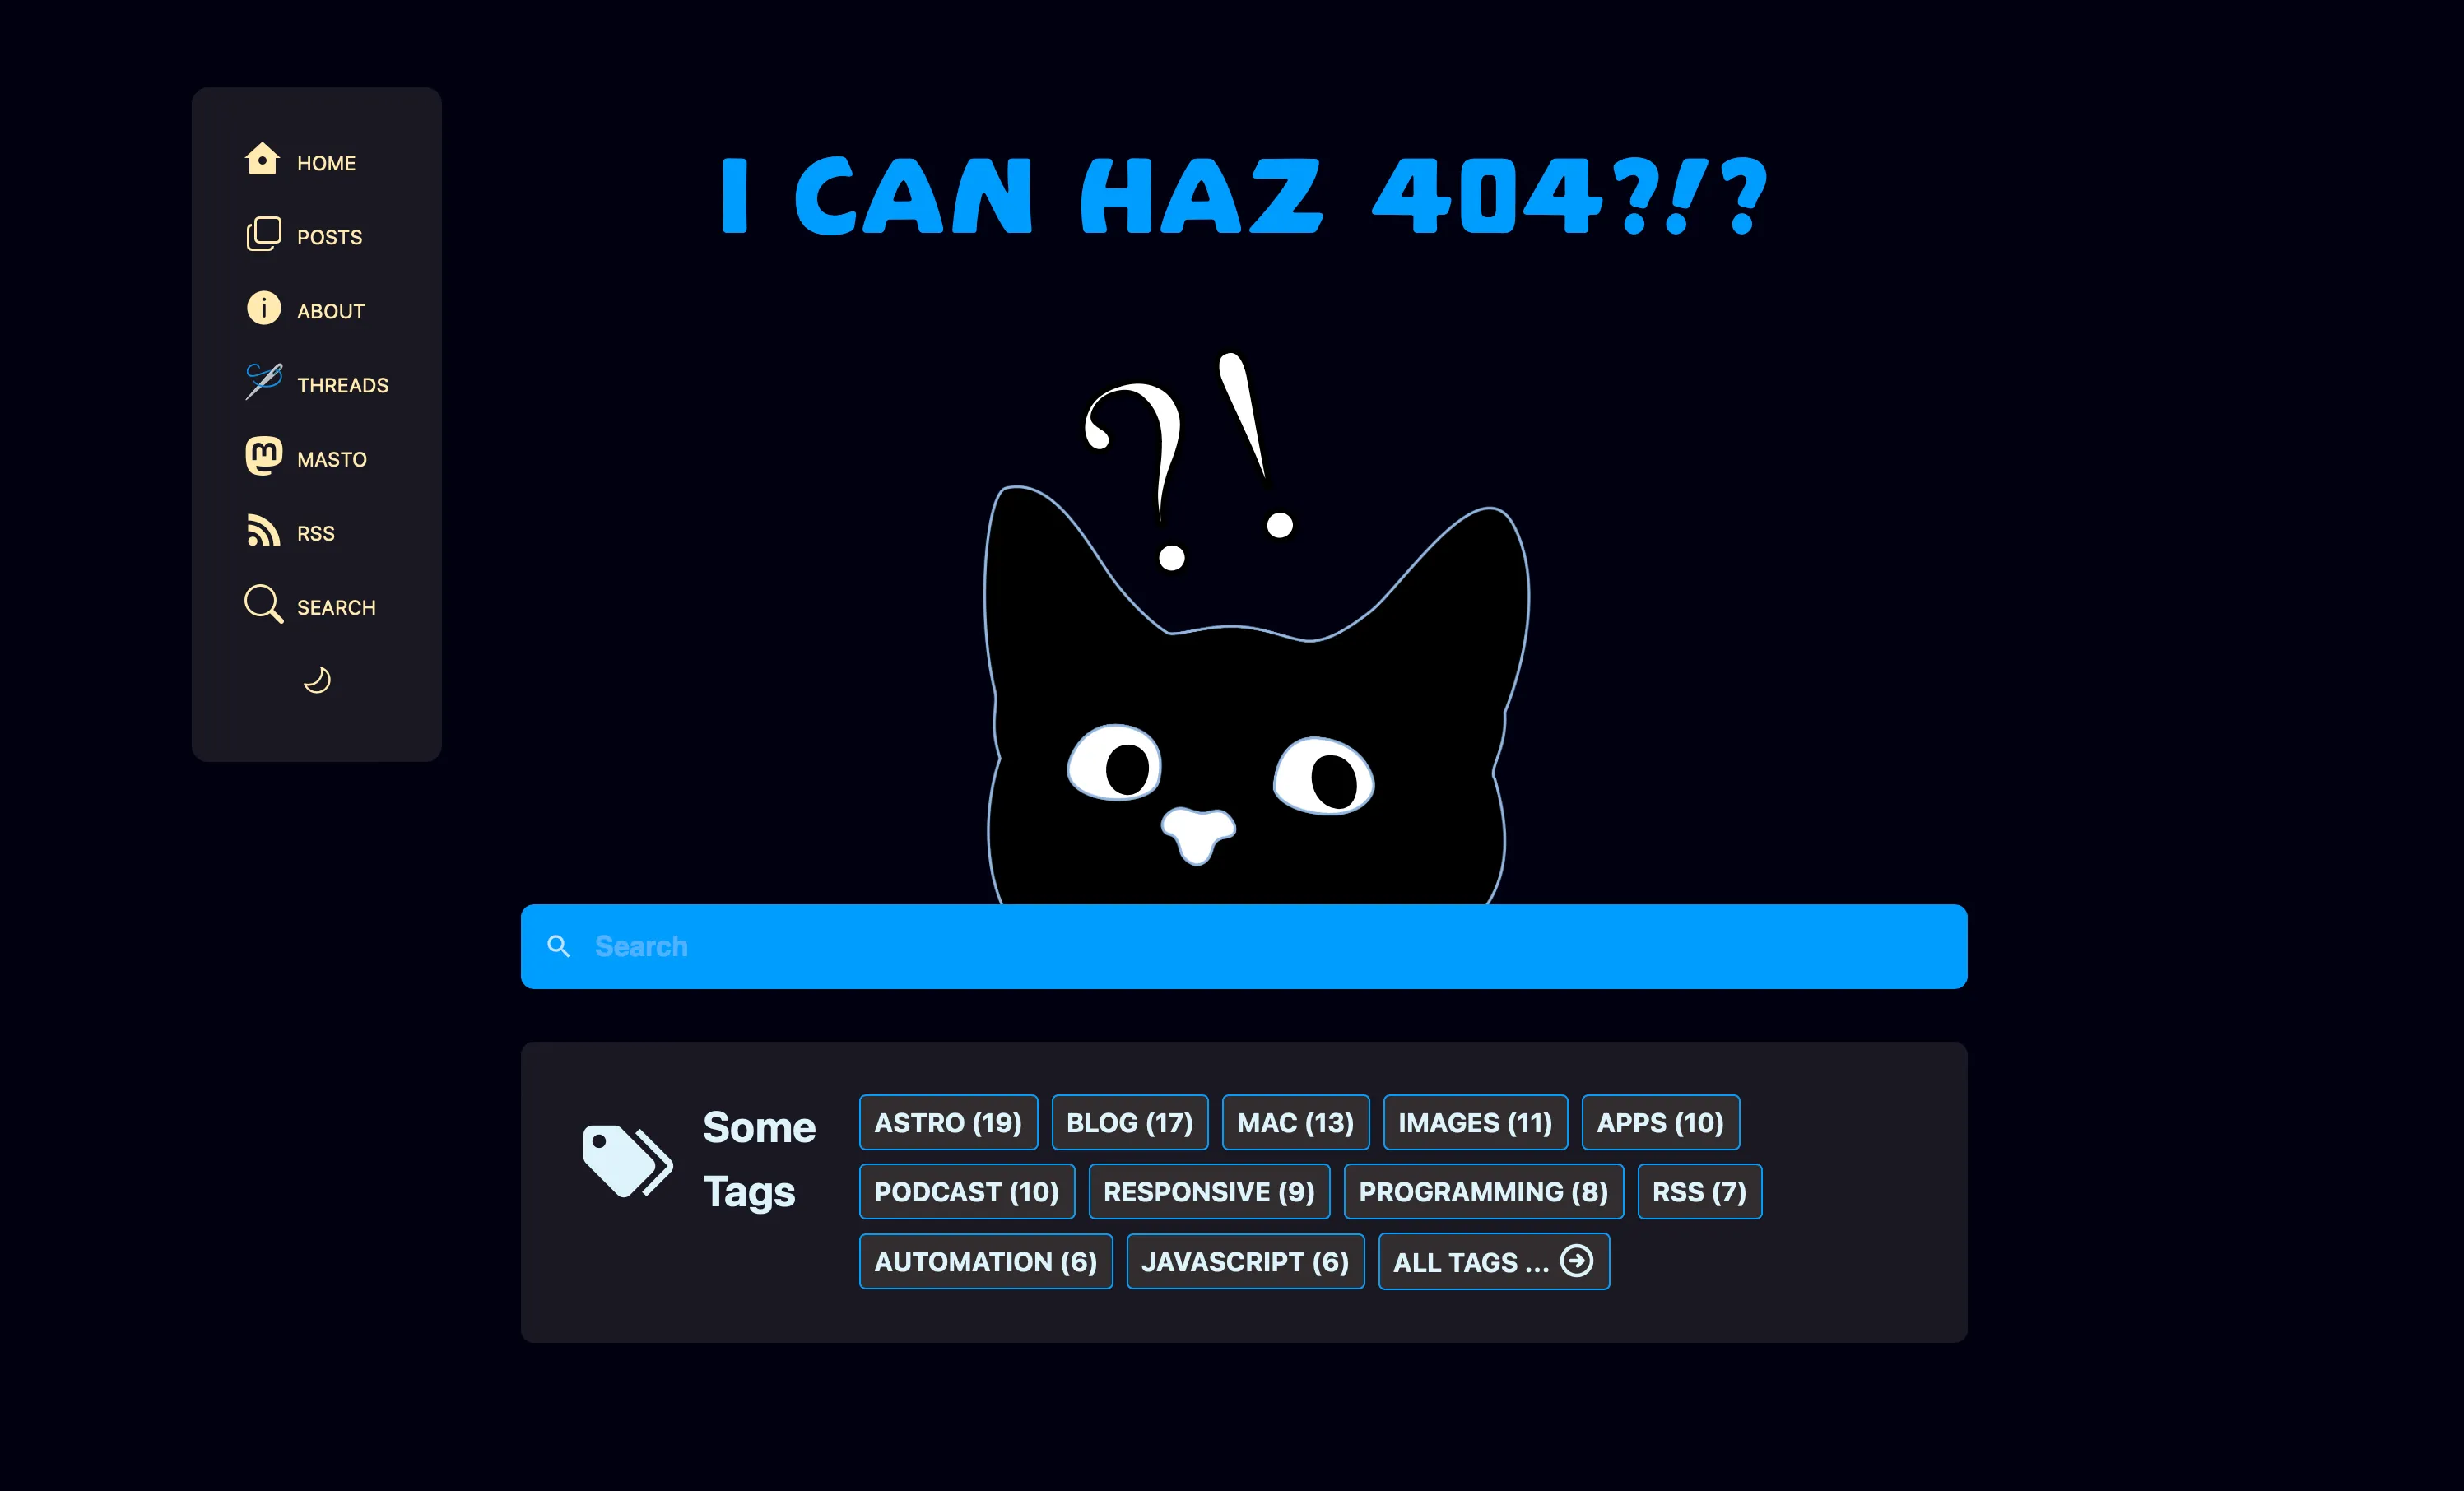 I can haz 404?! And TAG CLOUD?!